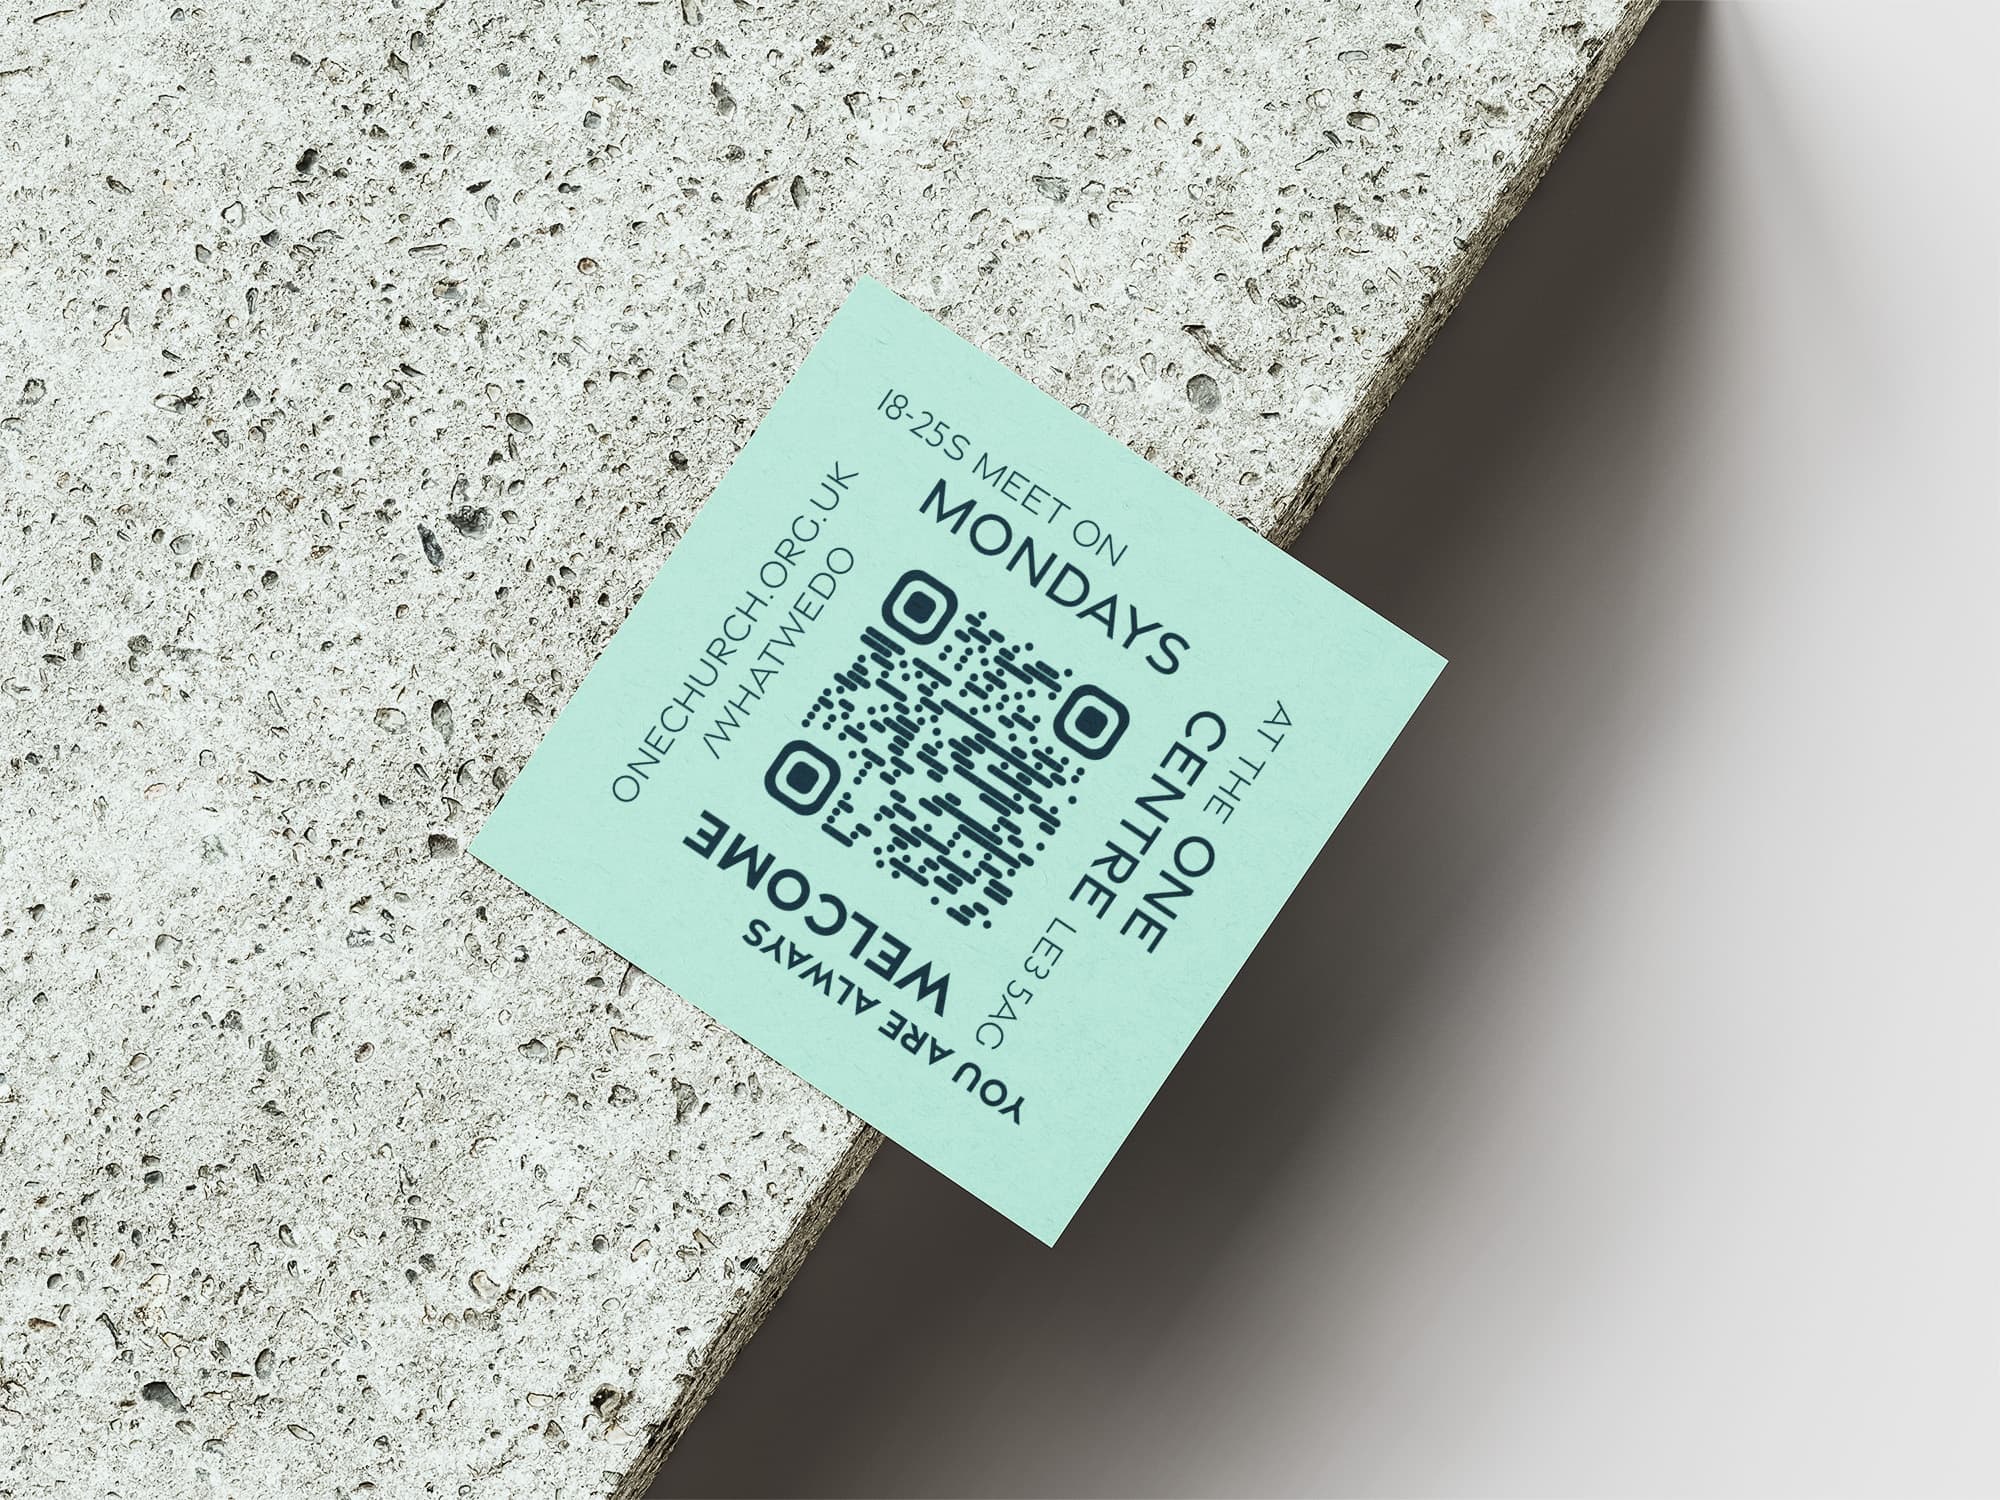 Reverse side of the YA business card with QR code and key information.